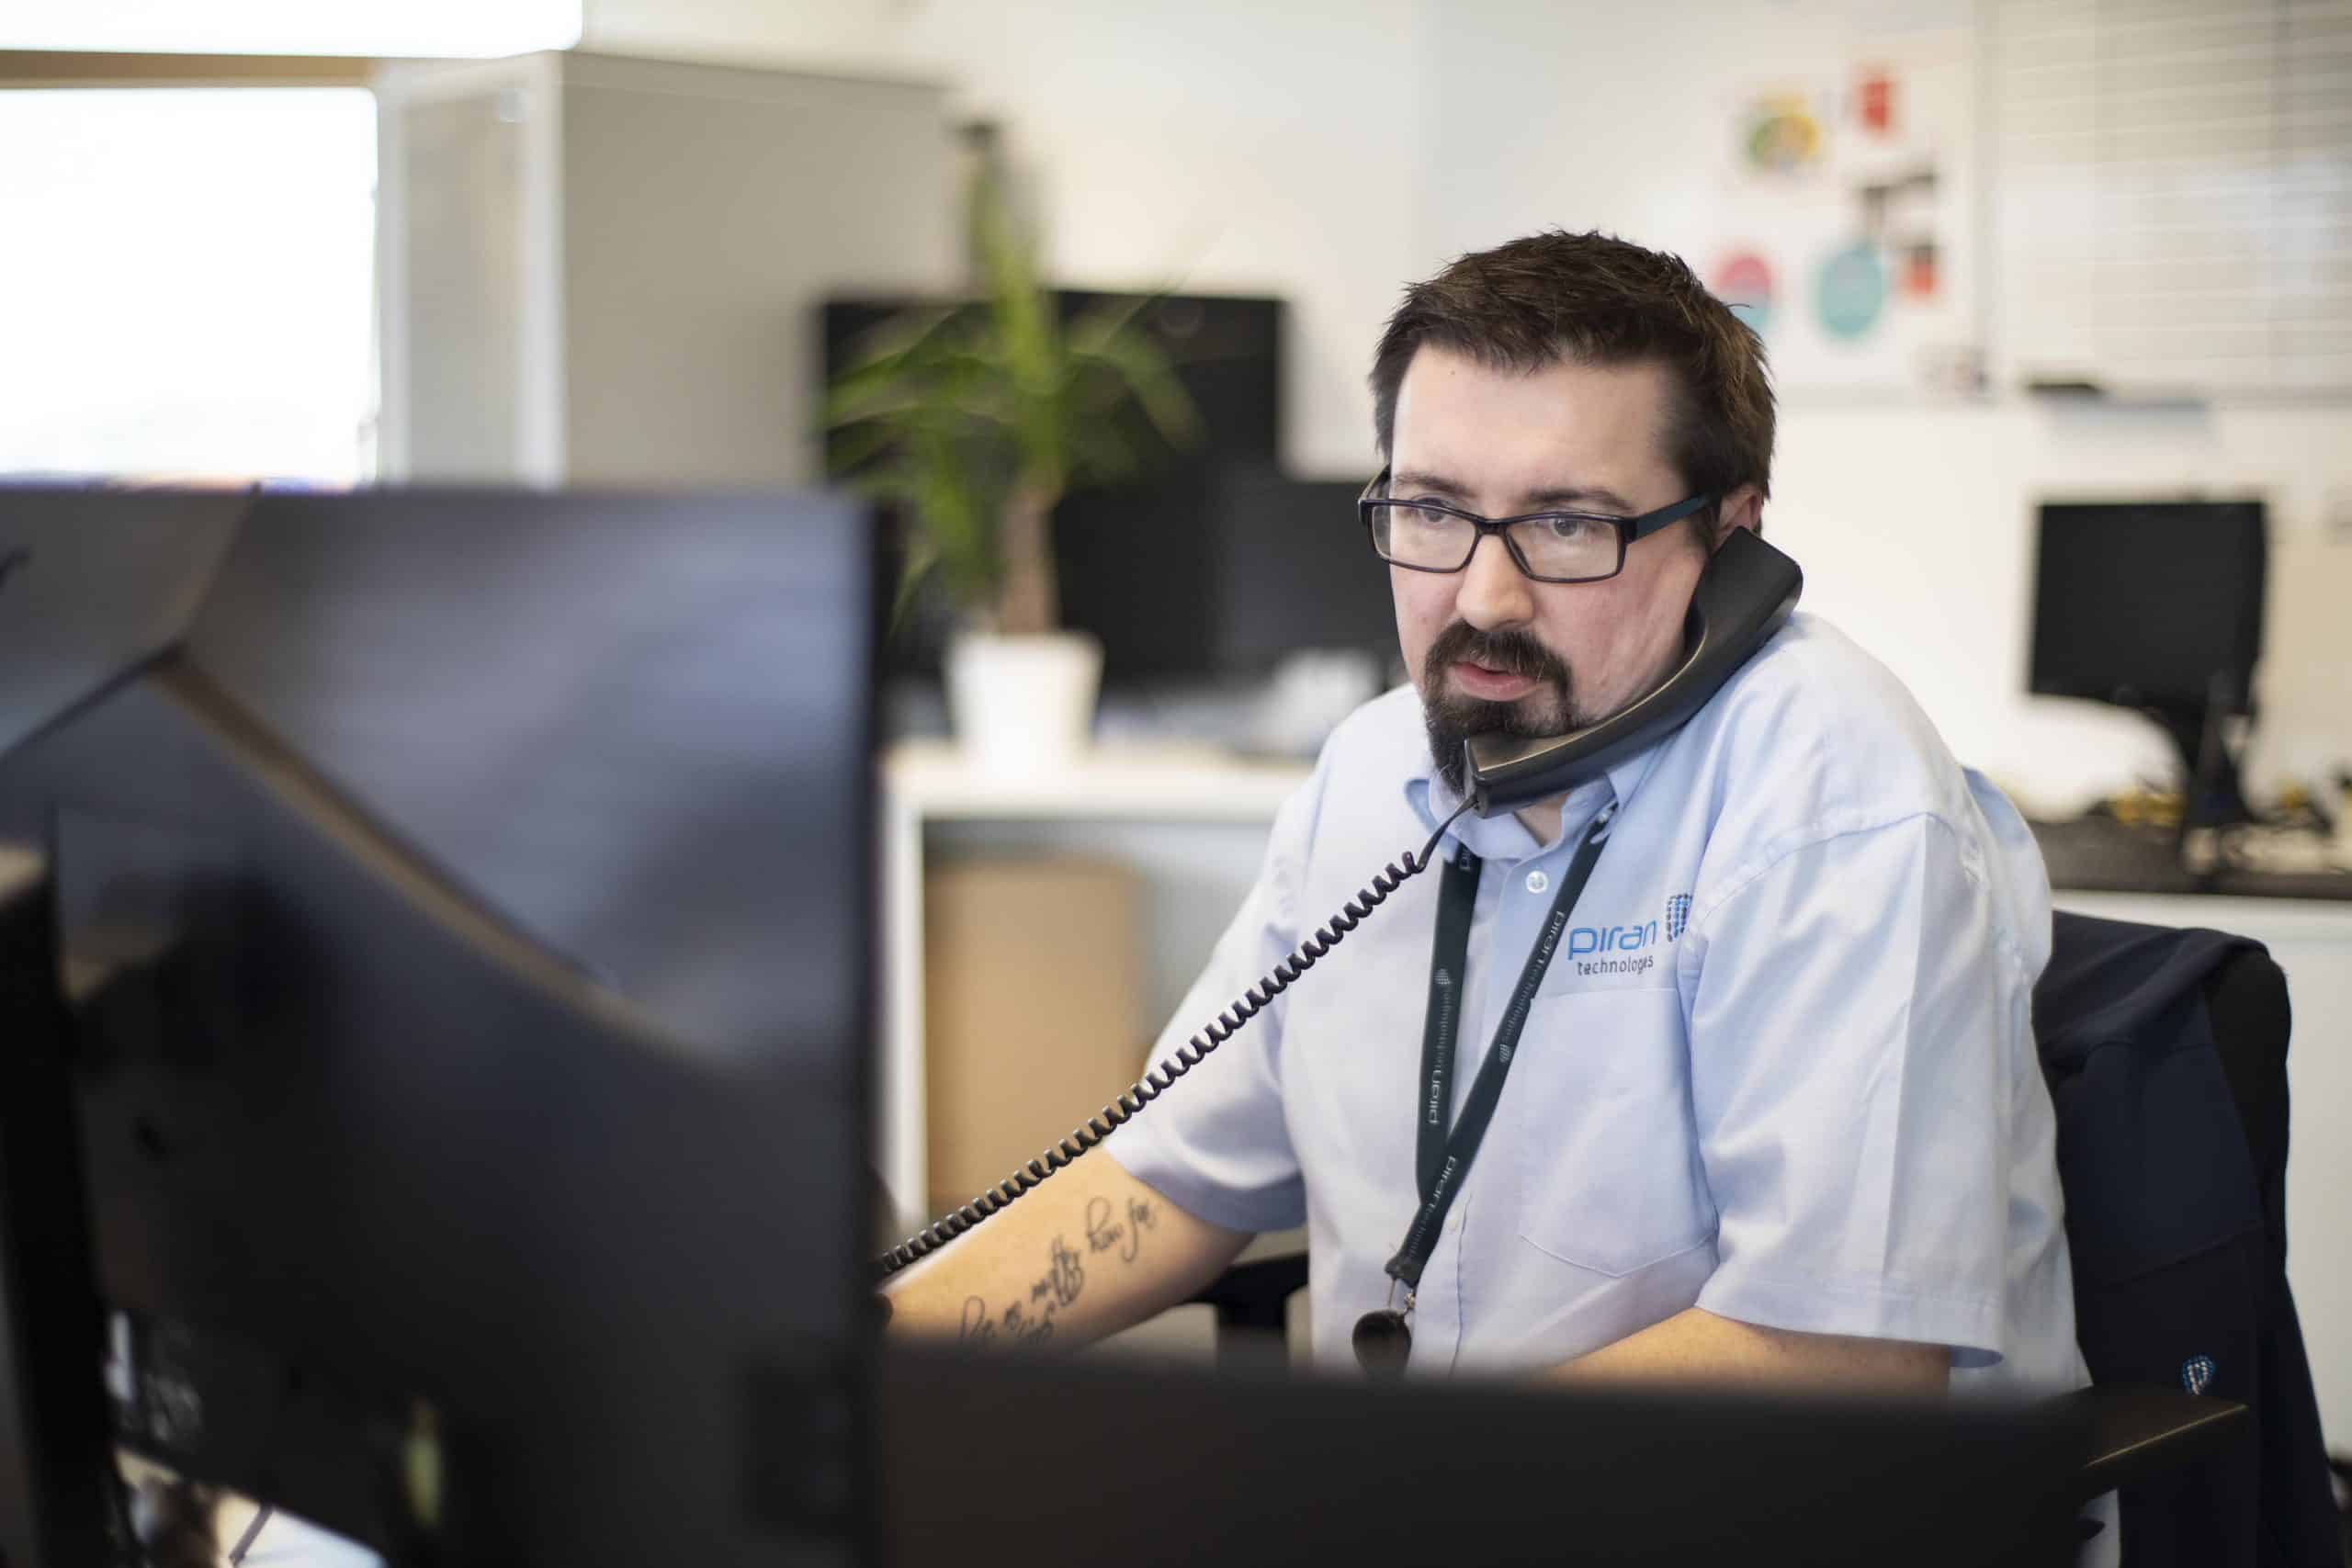 An IT support technician on the phone in an office